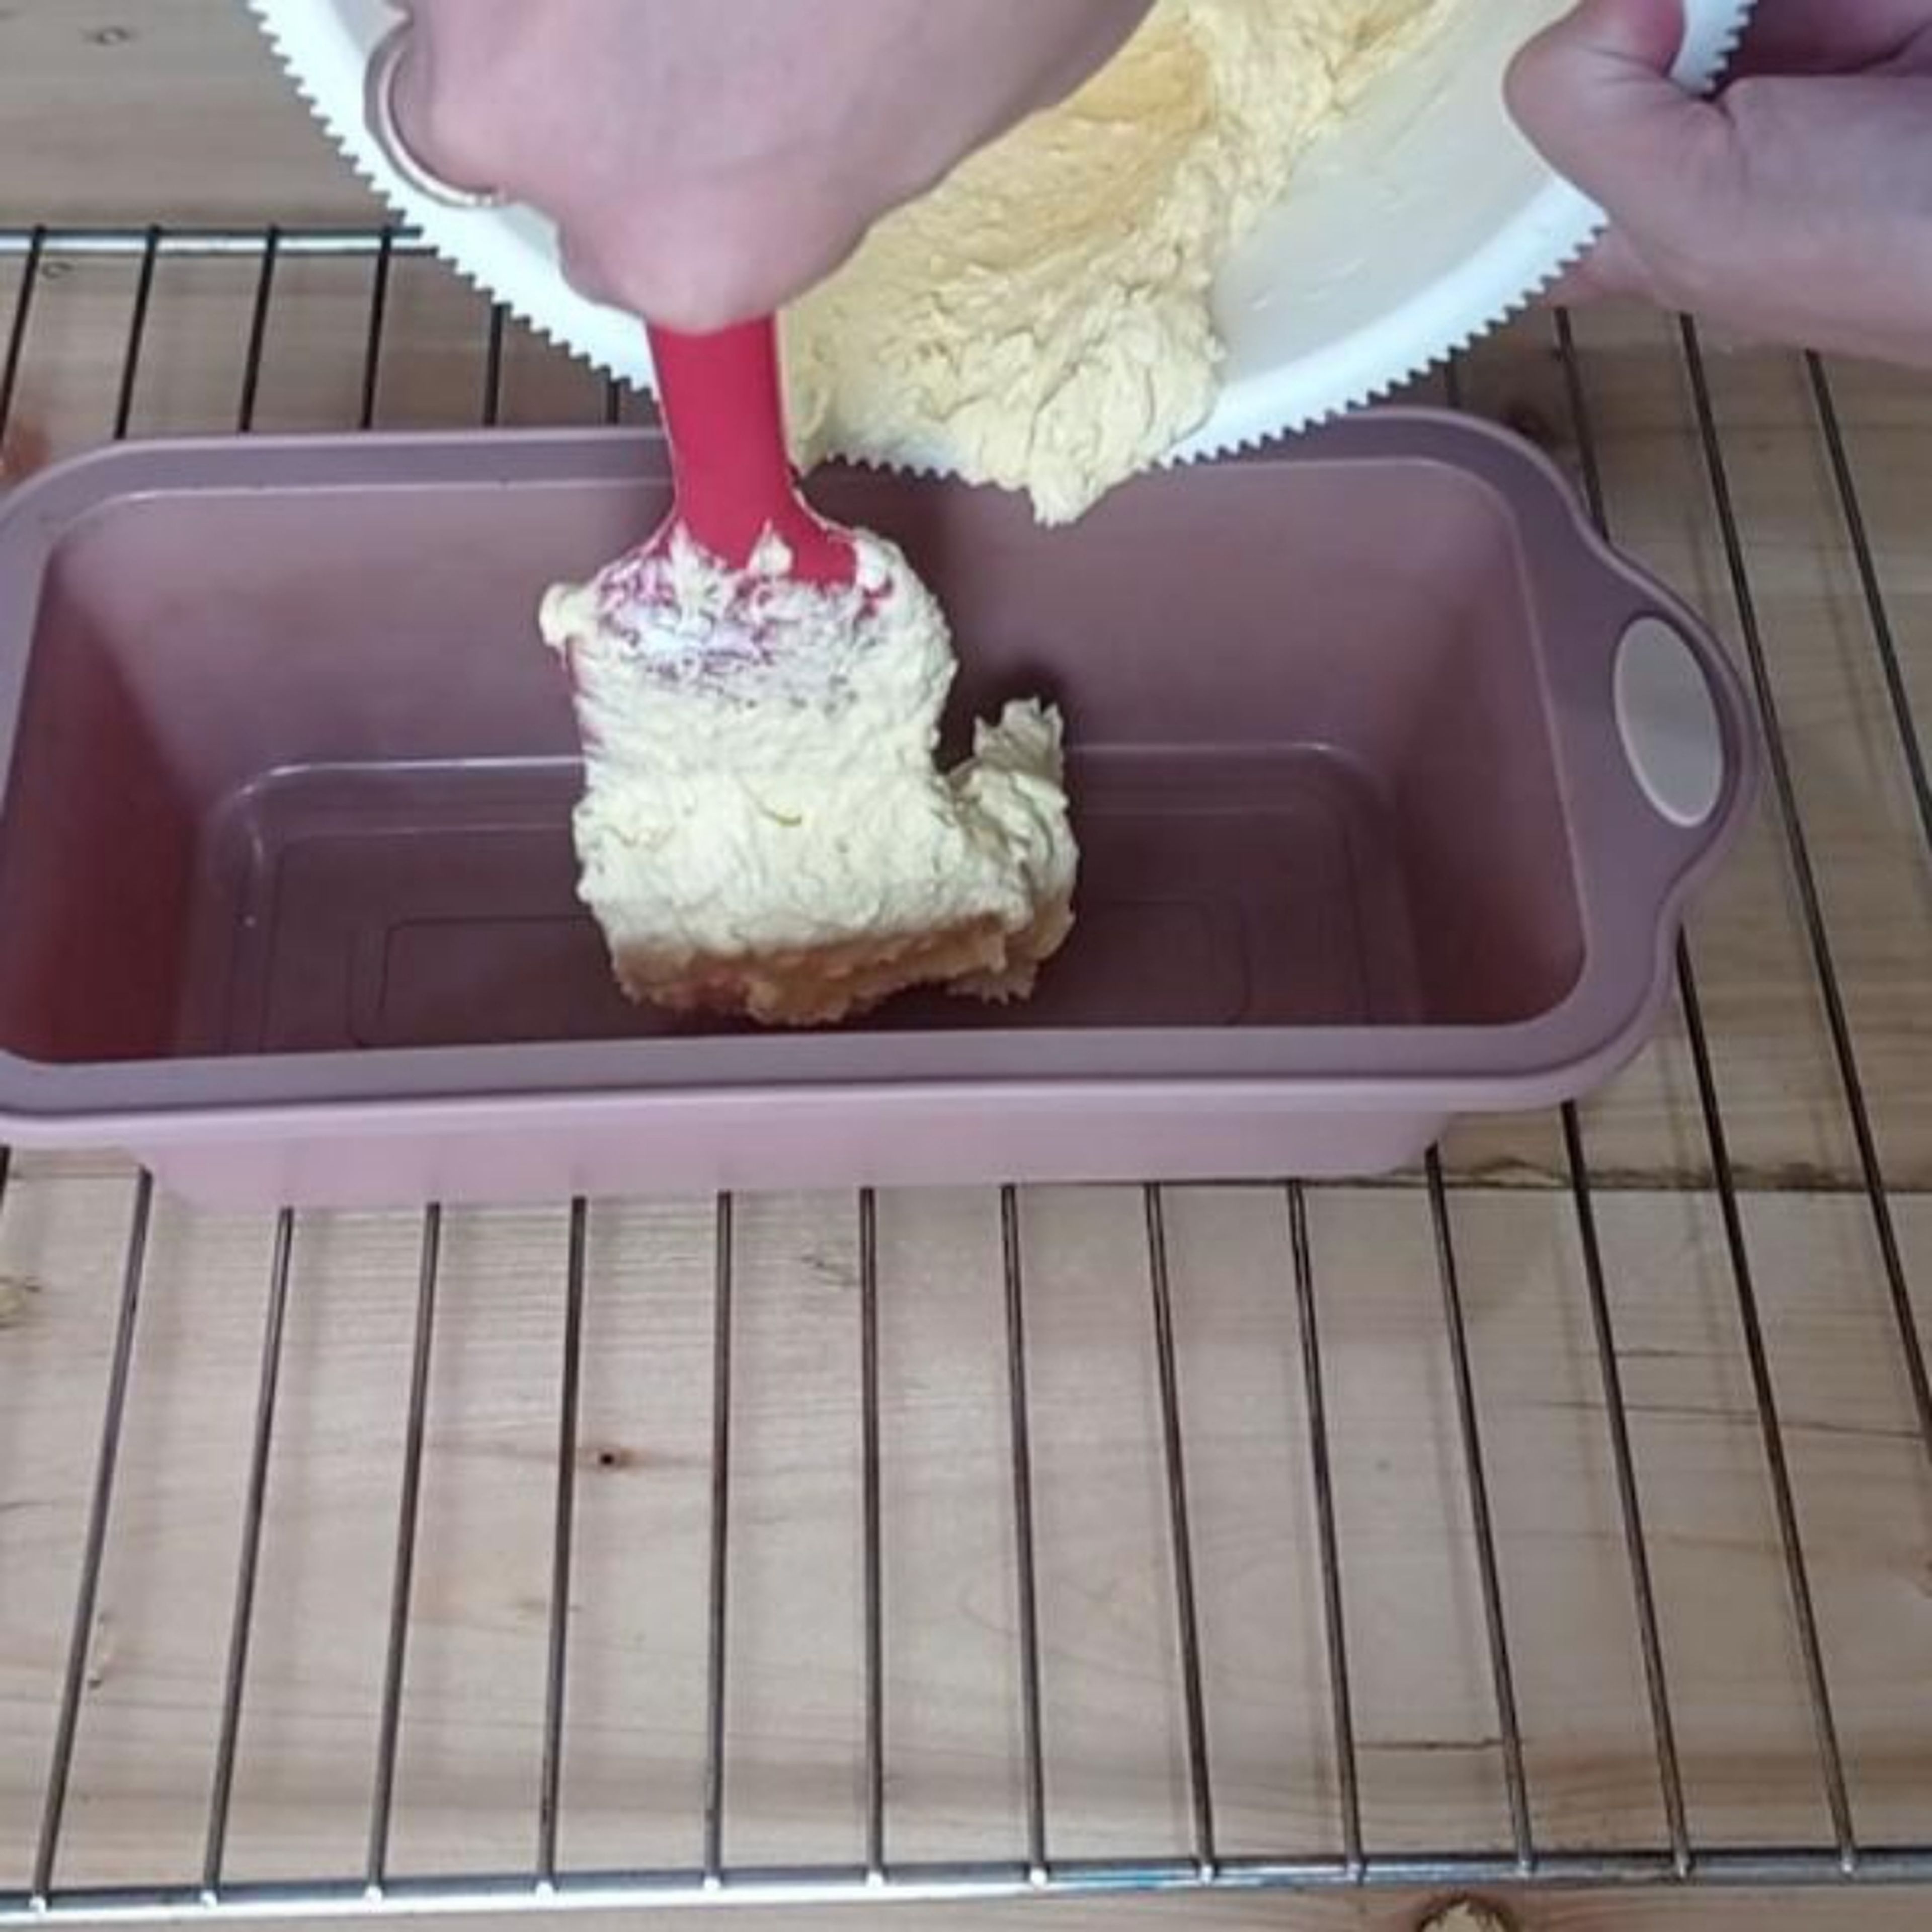 Pour the batter into 23x11x5 cm or 9x5x3 inches silicone loaf pan and bake for 45-50 minutes. (depends on your oven). Check using toothpick inserted in the middle of the cake, if comes out clean means your cake already done.